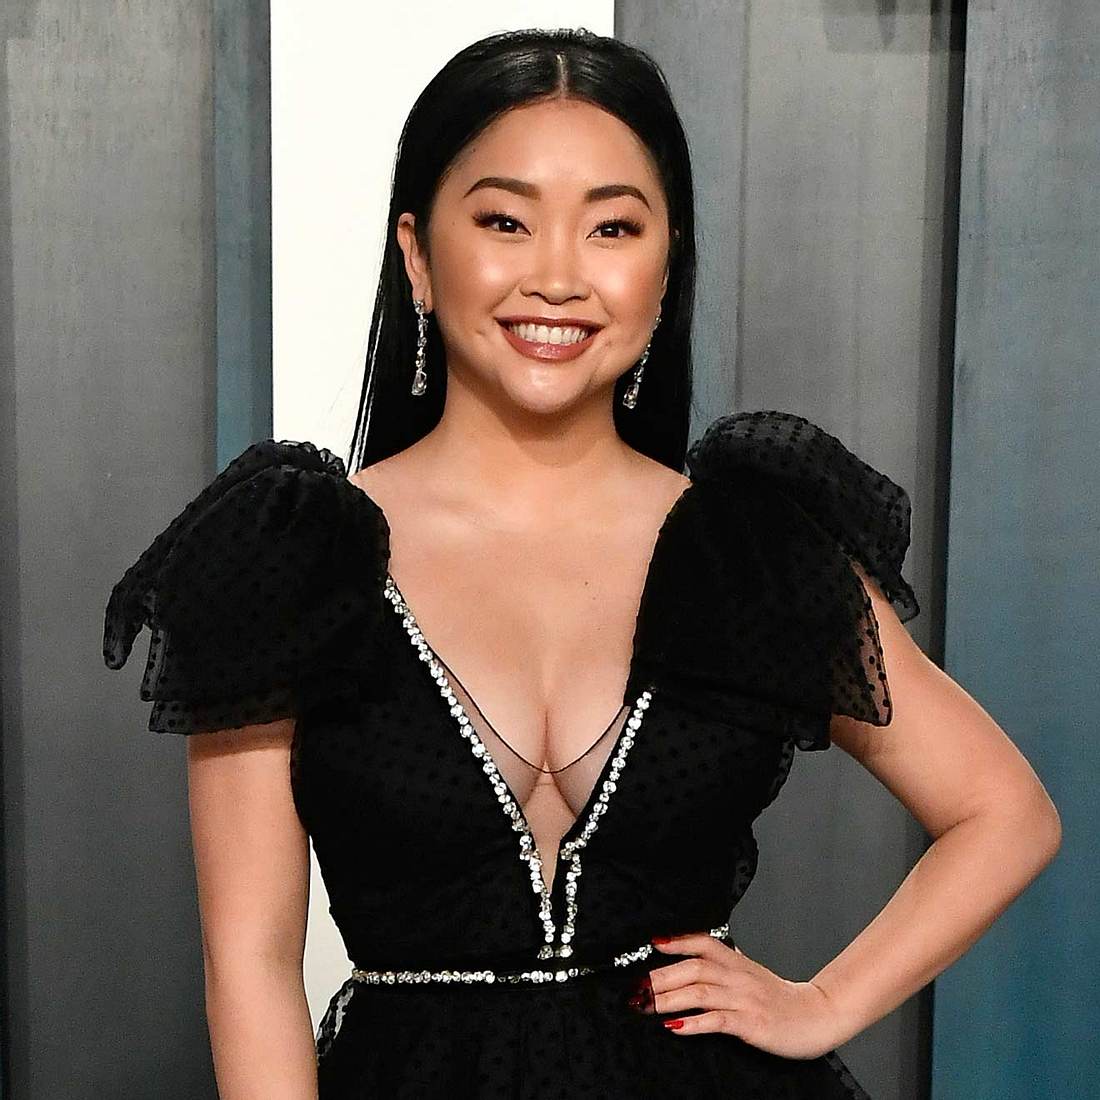 Lana Condor: Der “To All The Boys I’ve Loved Before”-Star macht jetzt Musik